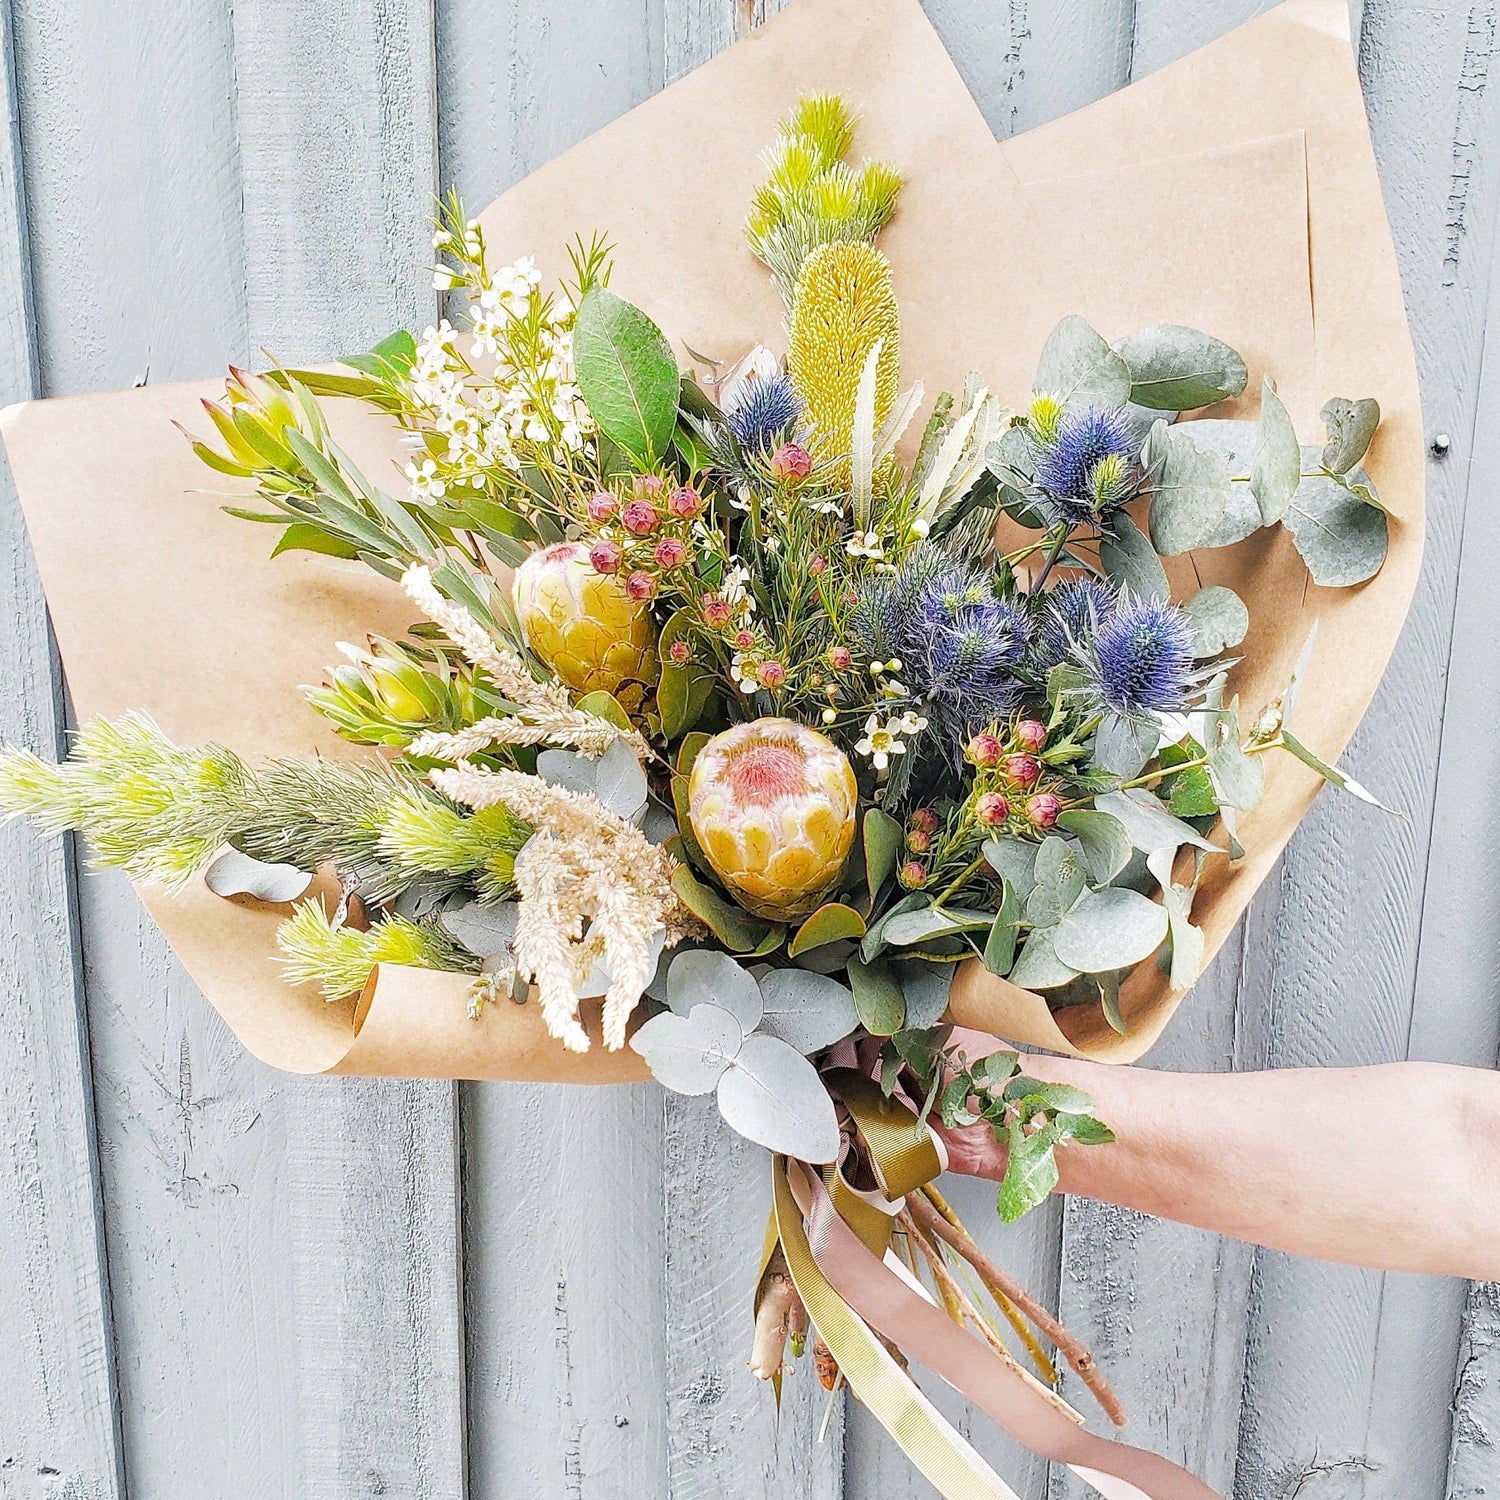 Dazzling Free-Spirit Box Flower Arrangements for Delivery or Pick